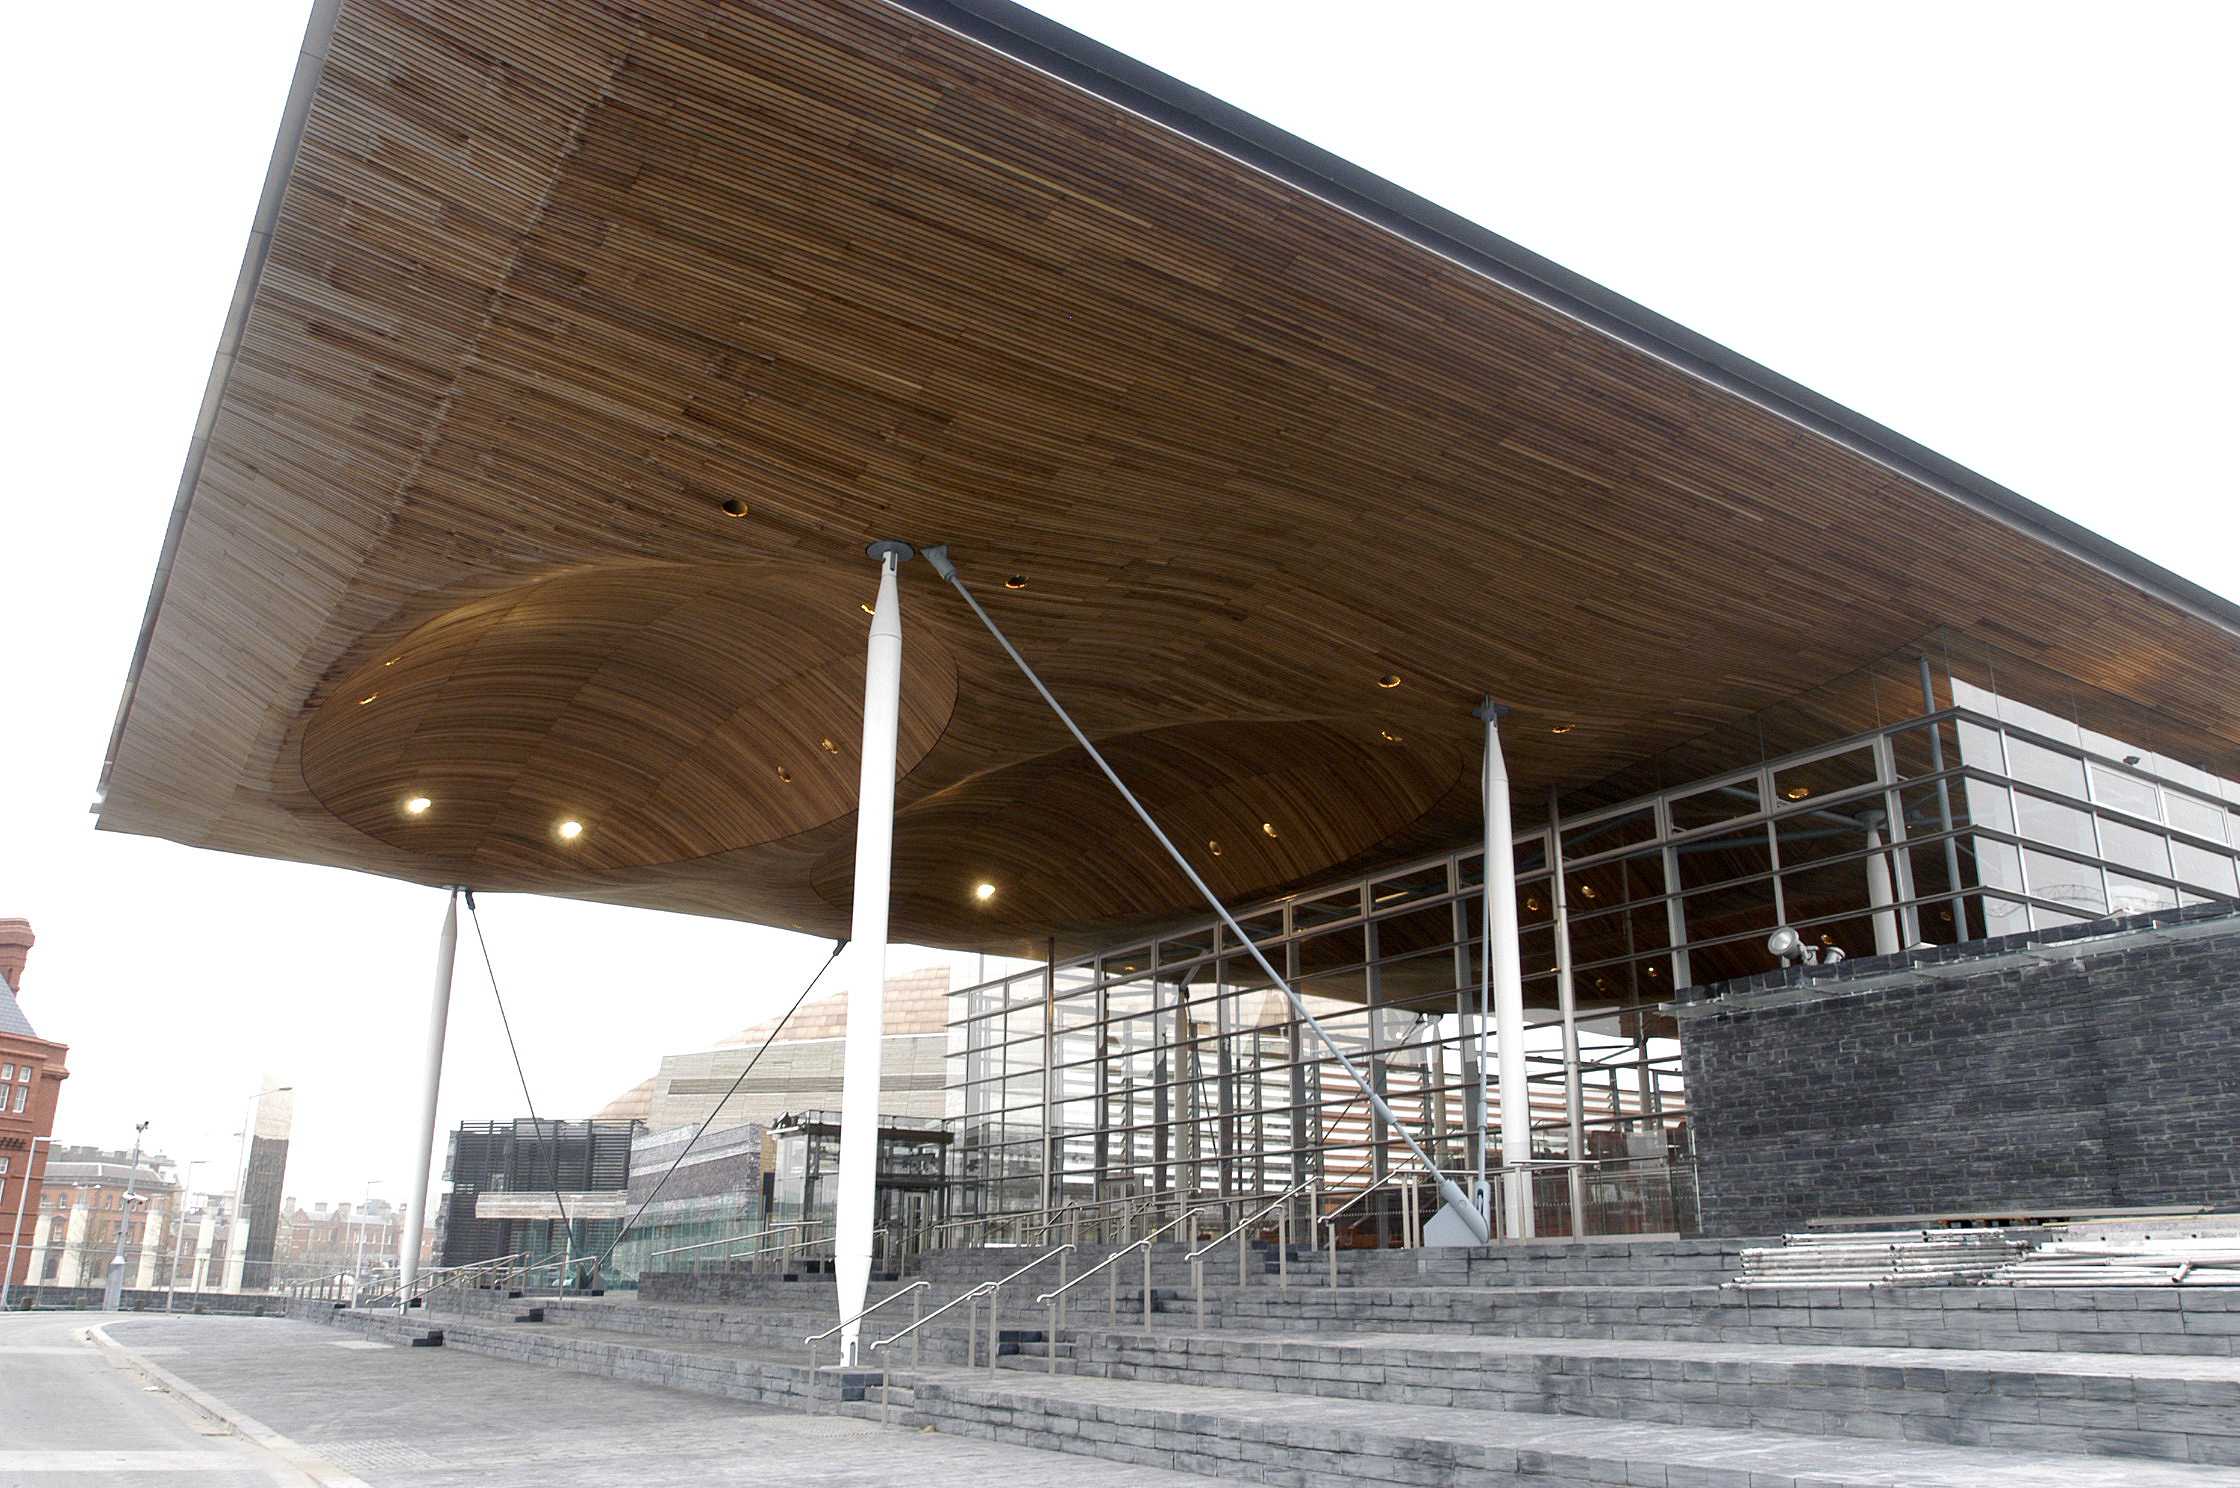 This is a picture of the Senedd.